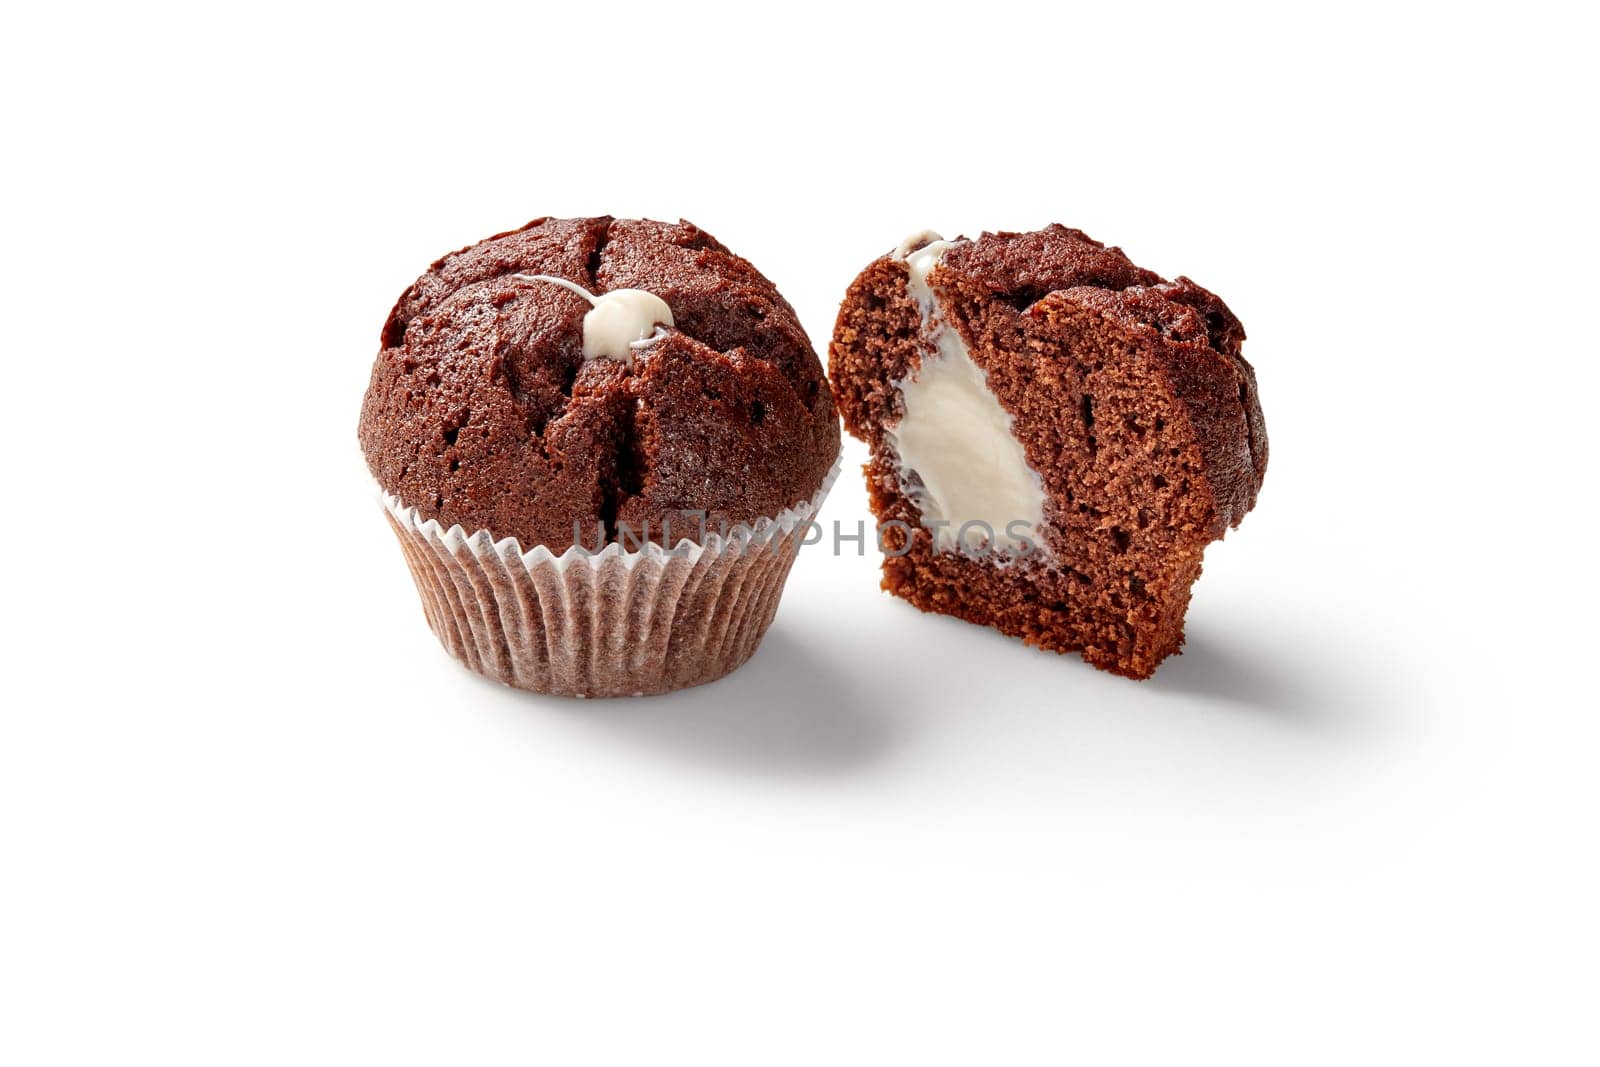 Whole and sliced chocolate muffins with creamy filling by nazarovsergey